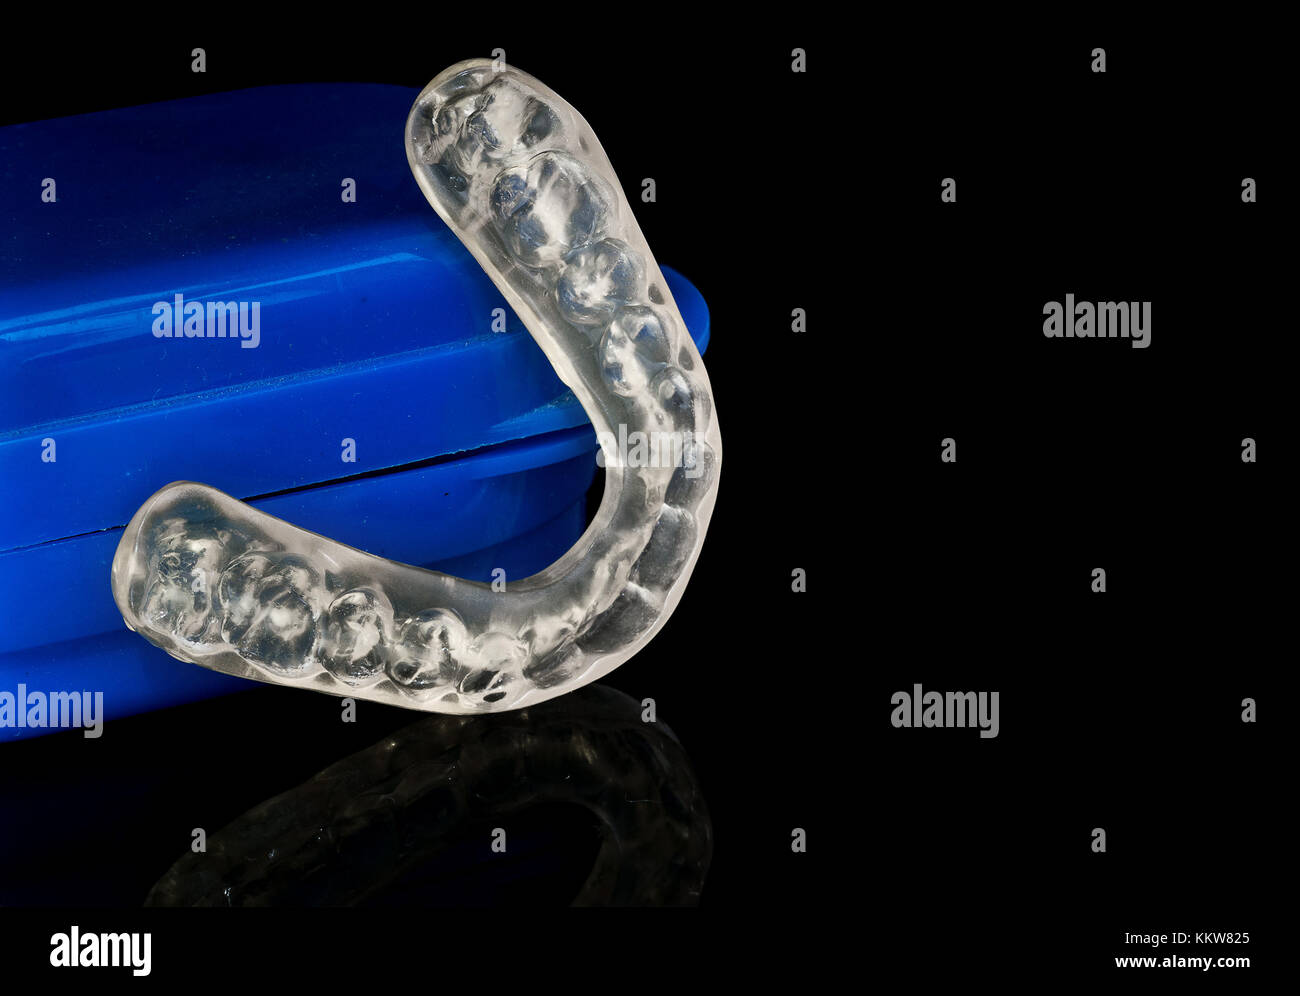 Acrylic transparent dental Mouth Guard on black background, showing reflection, used to treat and avoid bruxism (teeth grinding) Stock Photo